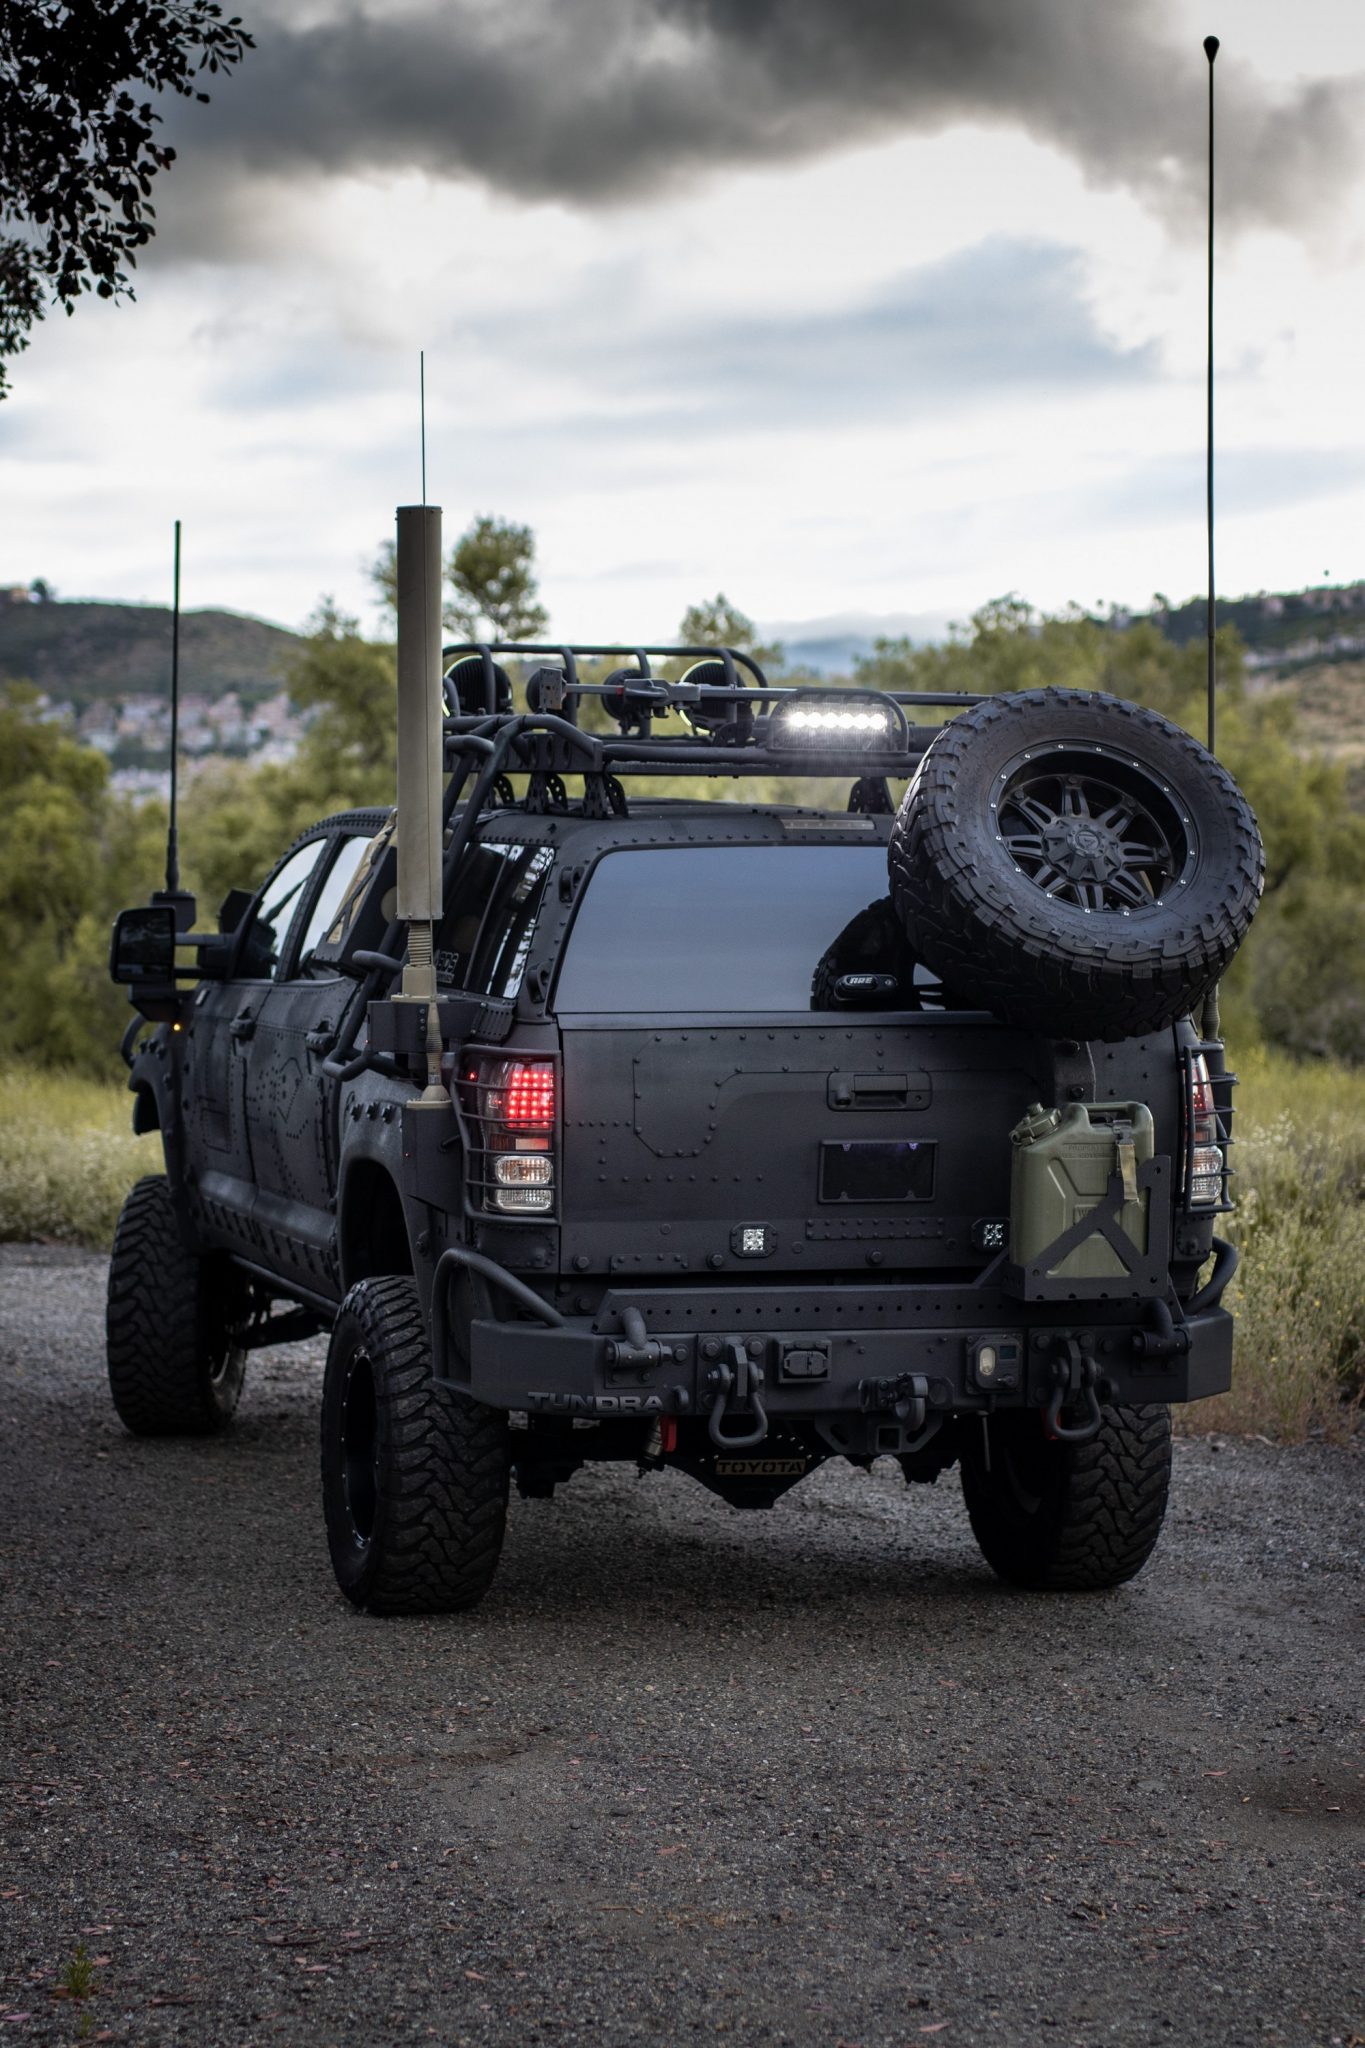 Apocalypse-Proof 2013 Toyota Tundra Meets All Needs, Not the Auction ...